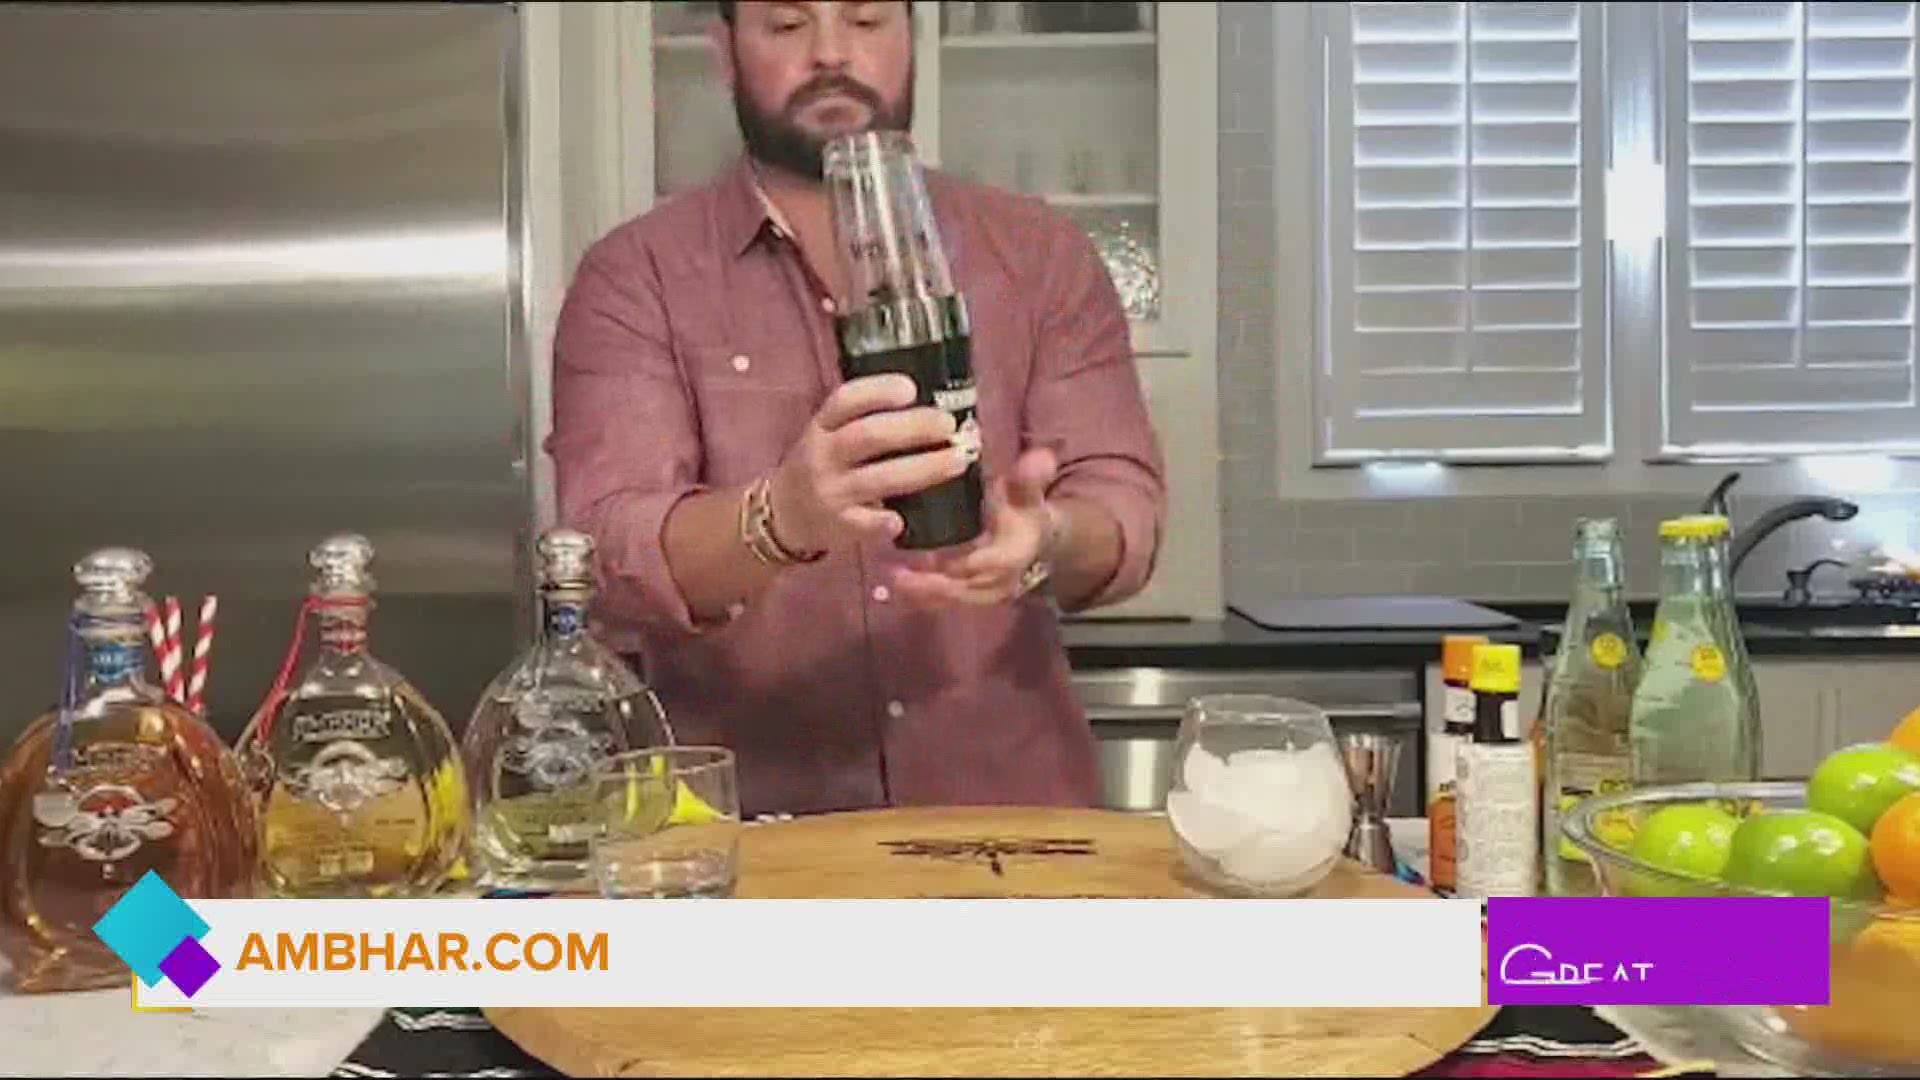 Ambhar Tequila is helping us celebrate National Tequila Day with some amazing drink recipes you can make at home!